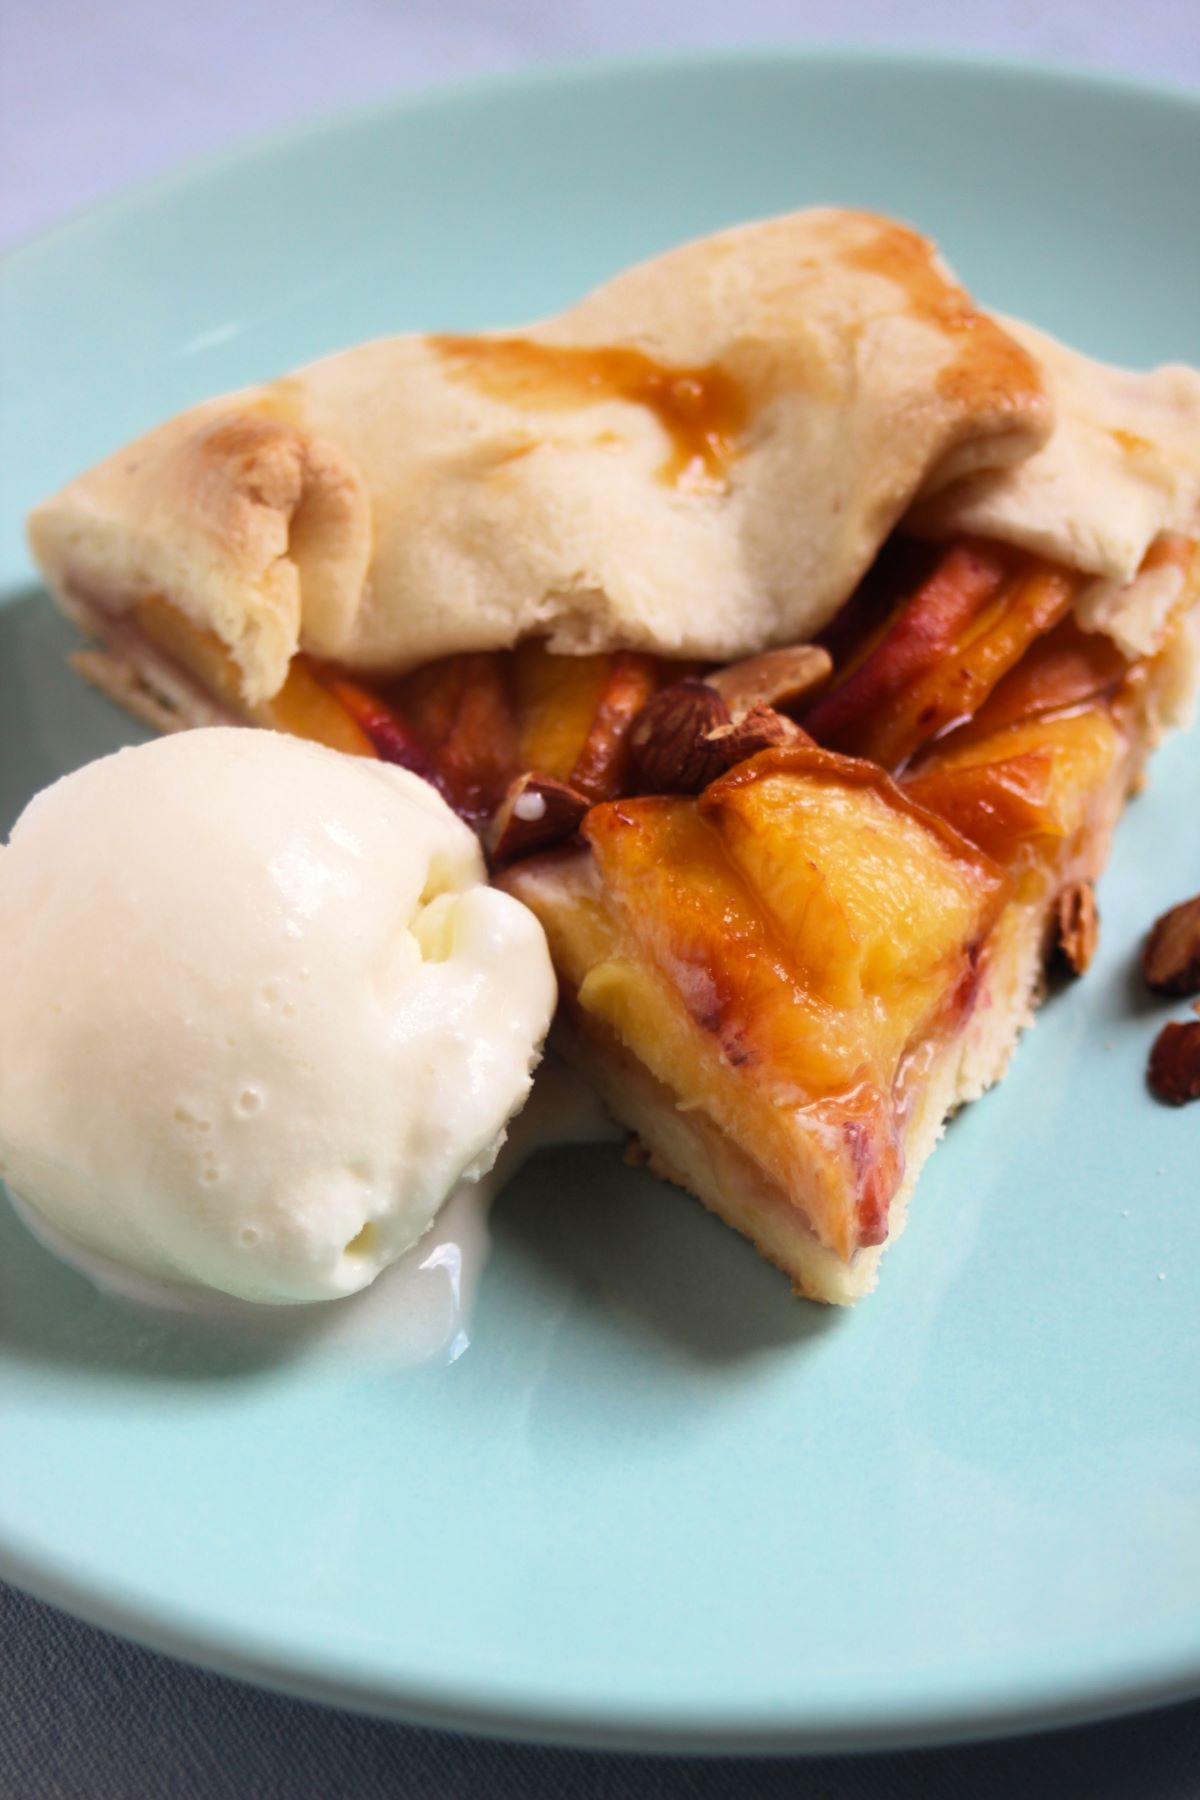 Portion of peach galette and a scoop of ice cream on aqua green plate.